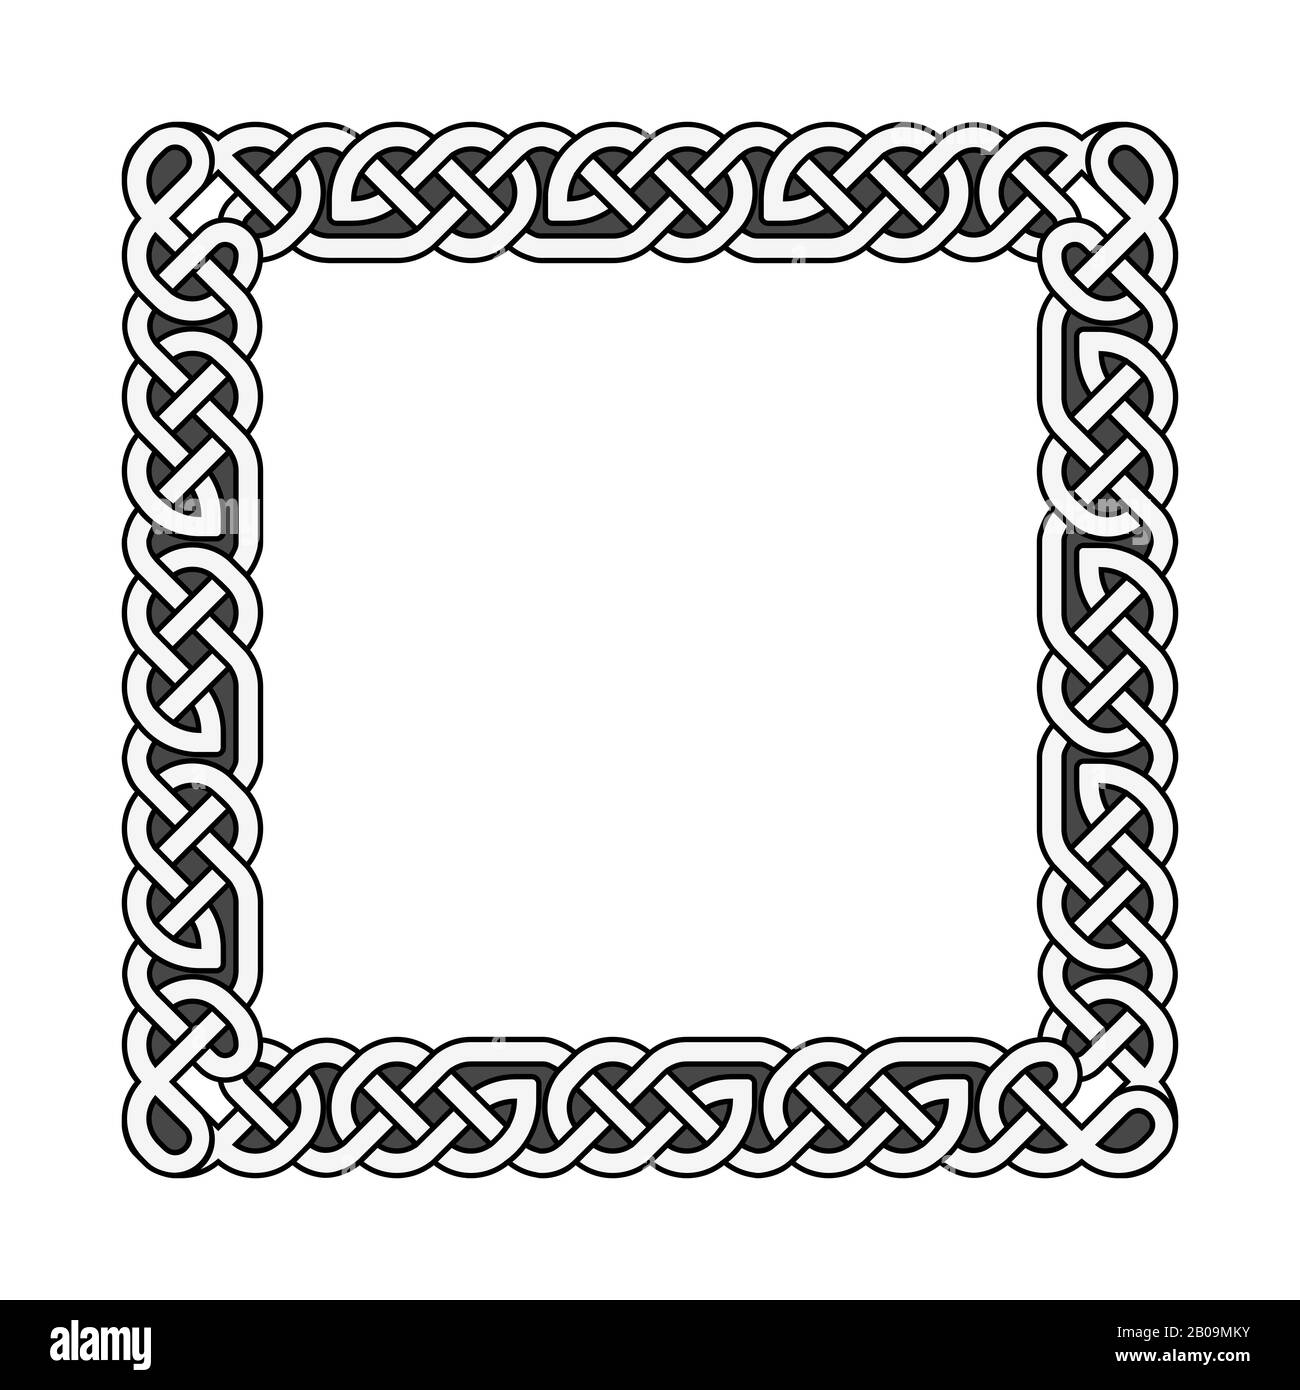 Square celtic knots vector medieval frame in black and white. Traditional frame pattern illustration Stock Vector